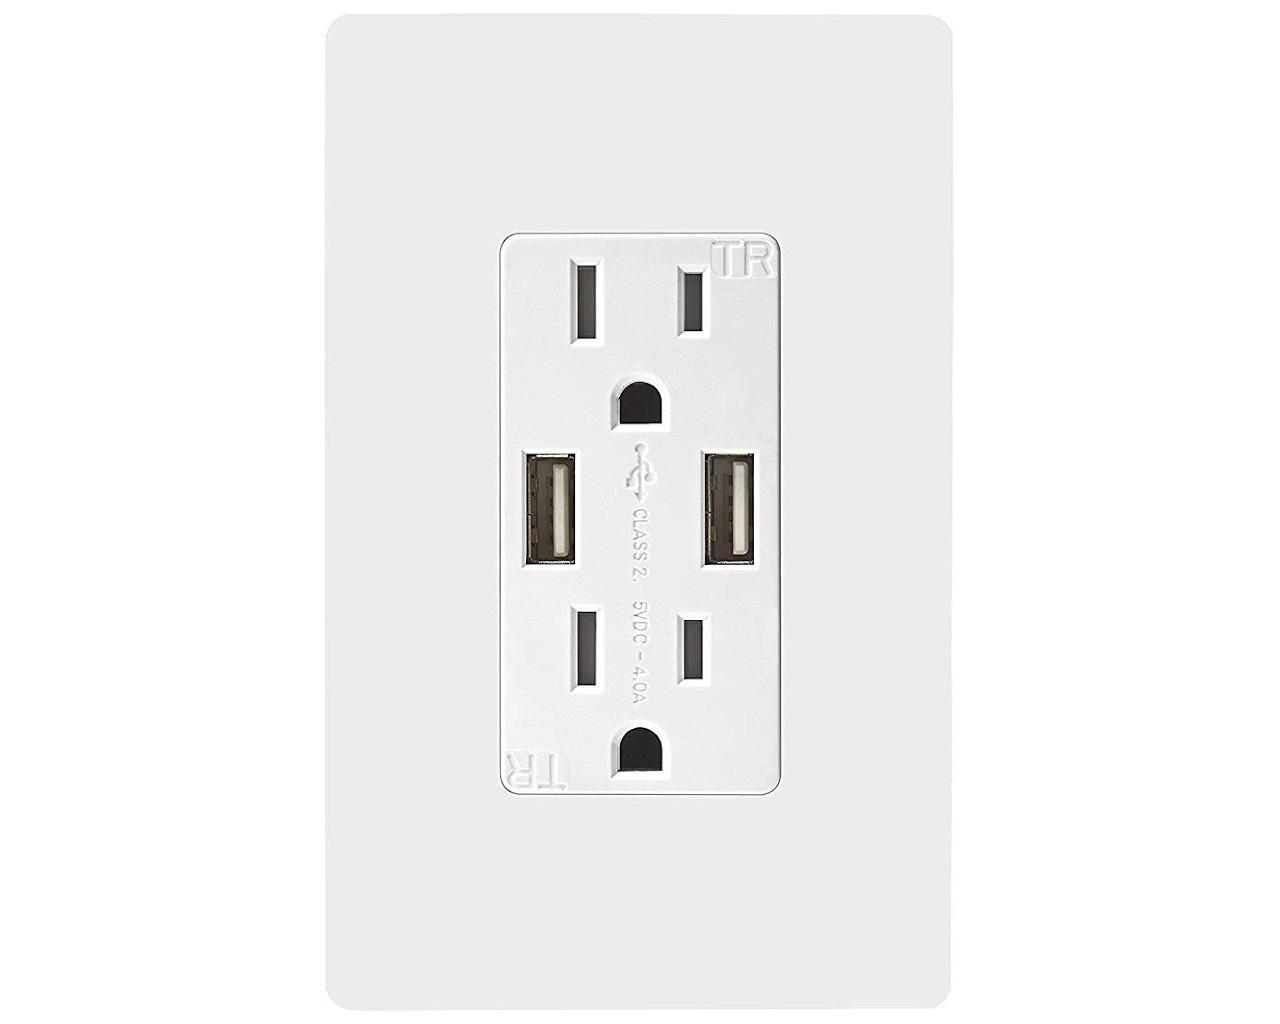 10 USB wall outlets to move your home or office into the future